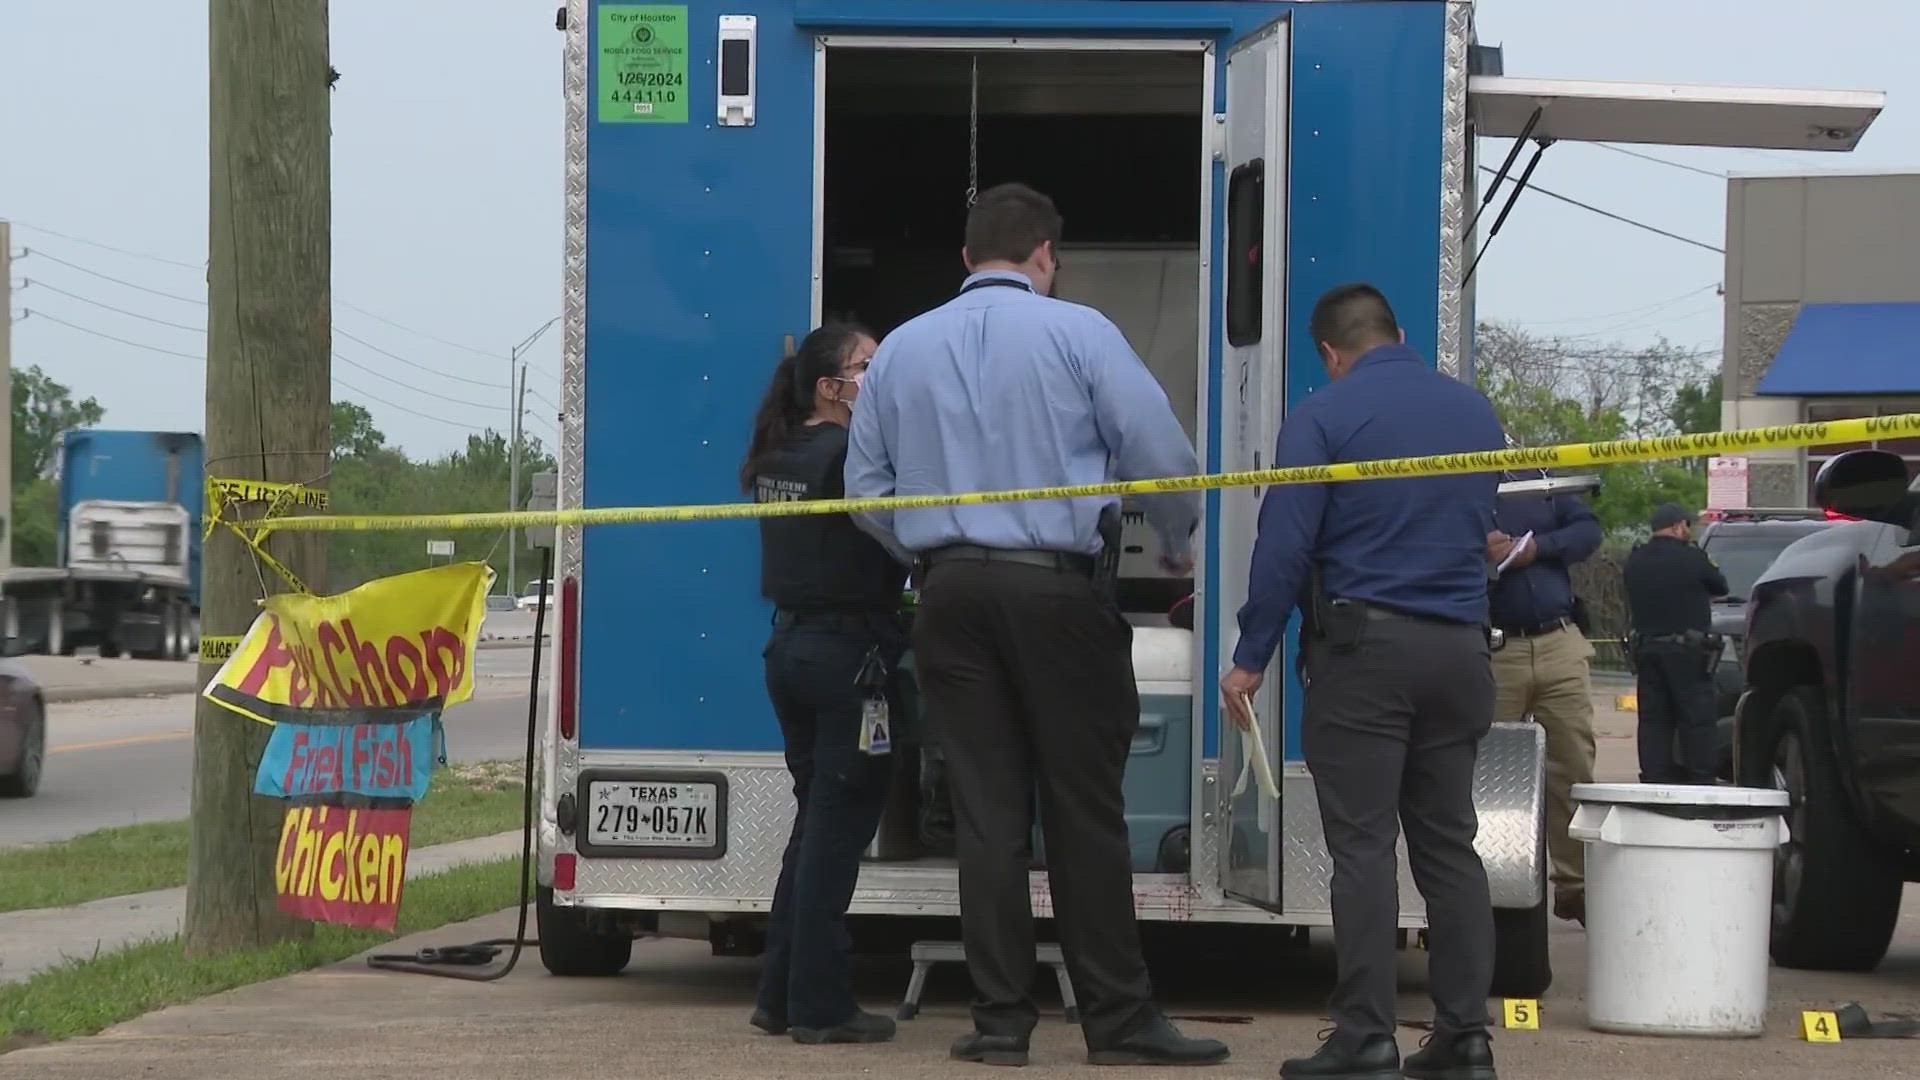 Houston police said a 23-year-old man was shot and killed when he tried to rob a food truck on South Main on Tuesday afternoon.